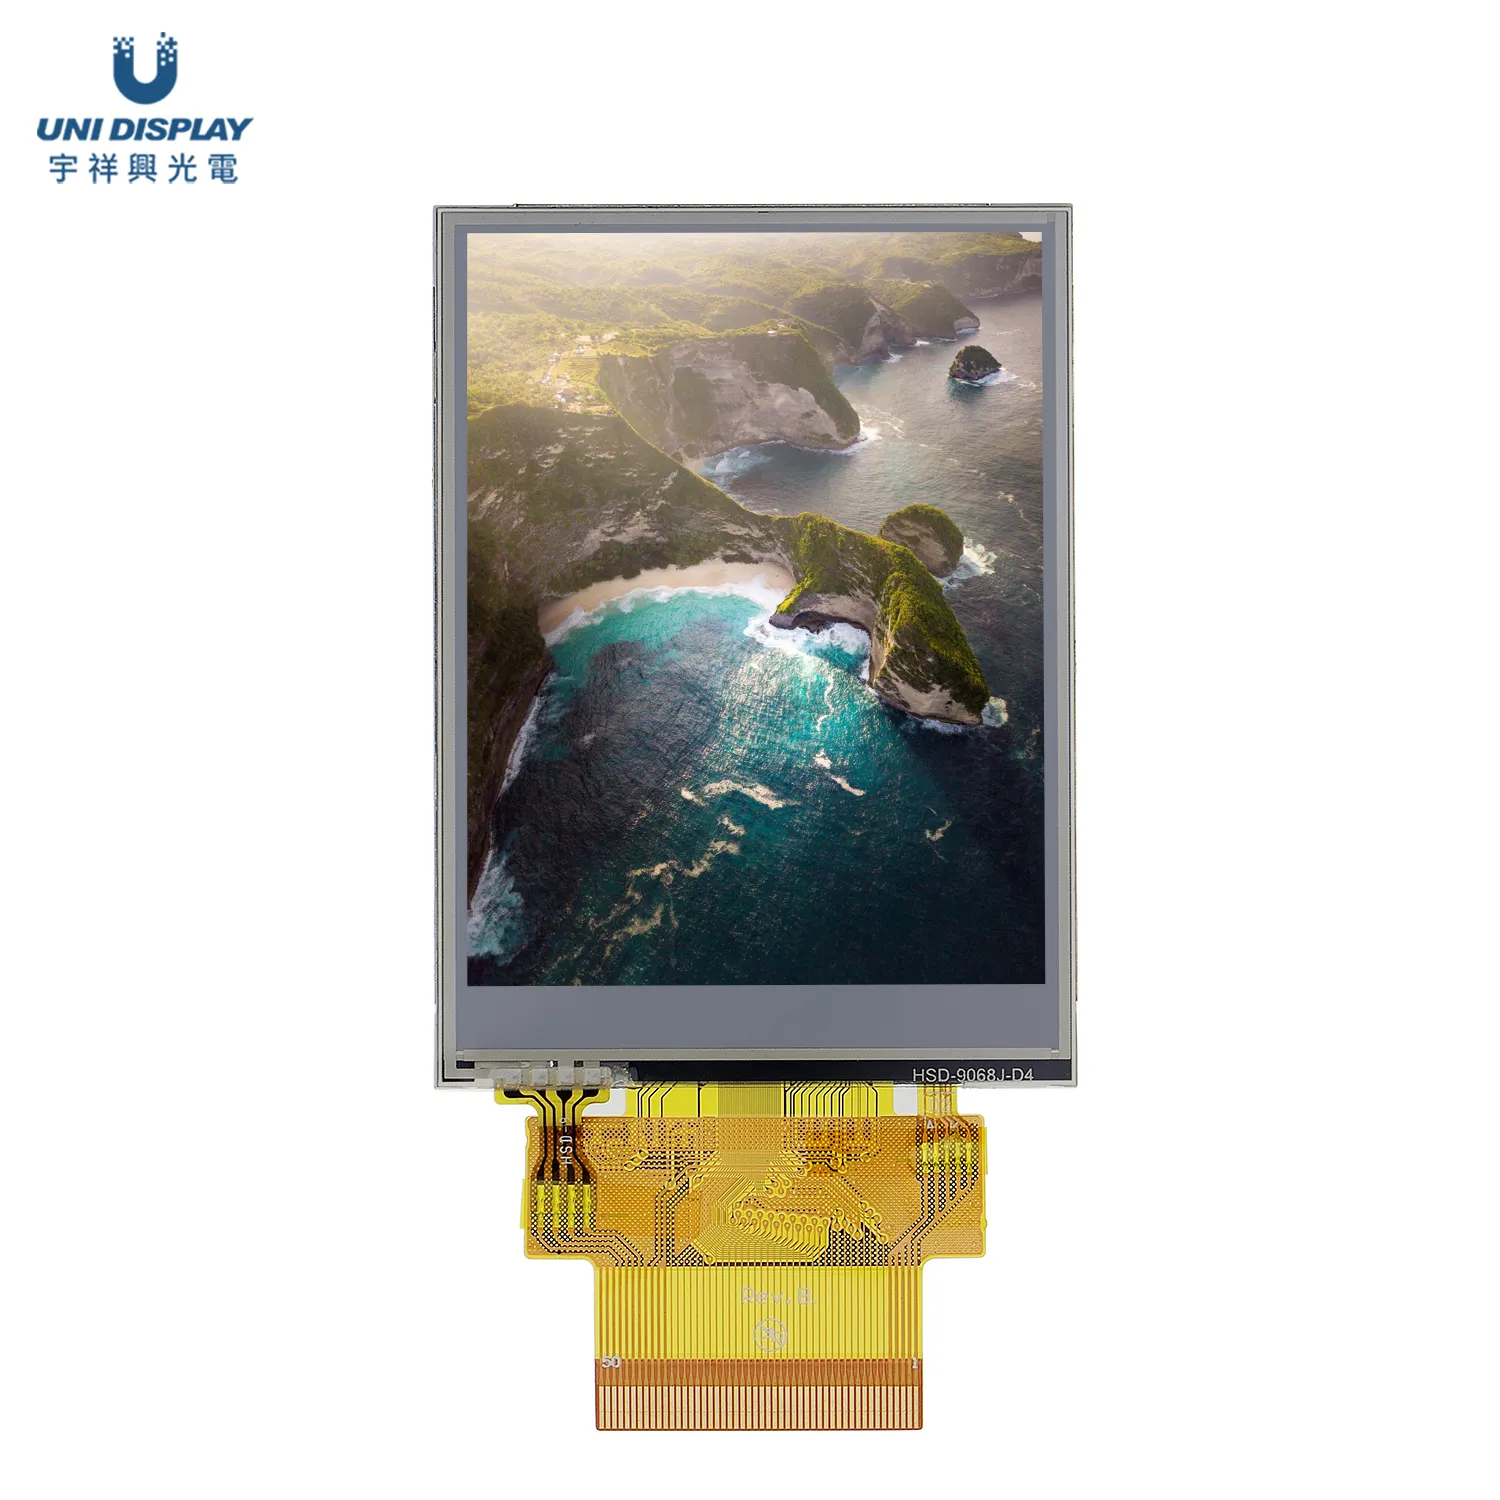 50 pin lcd display ili9341 320x240 2.8" inch tft lcd touch screen 2.8 inch lcd display module with 4-wire resistive touch panel